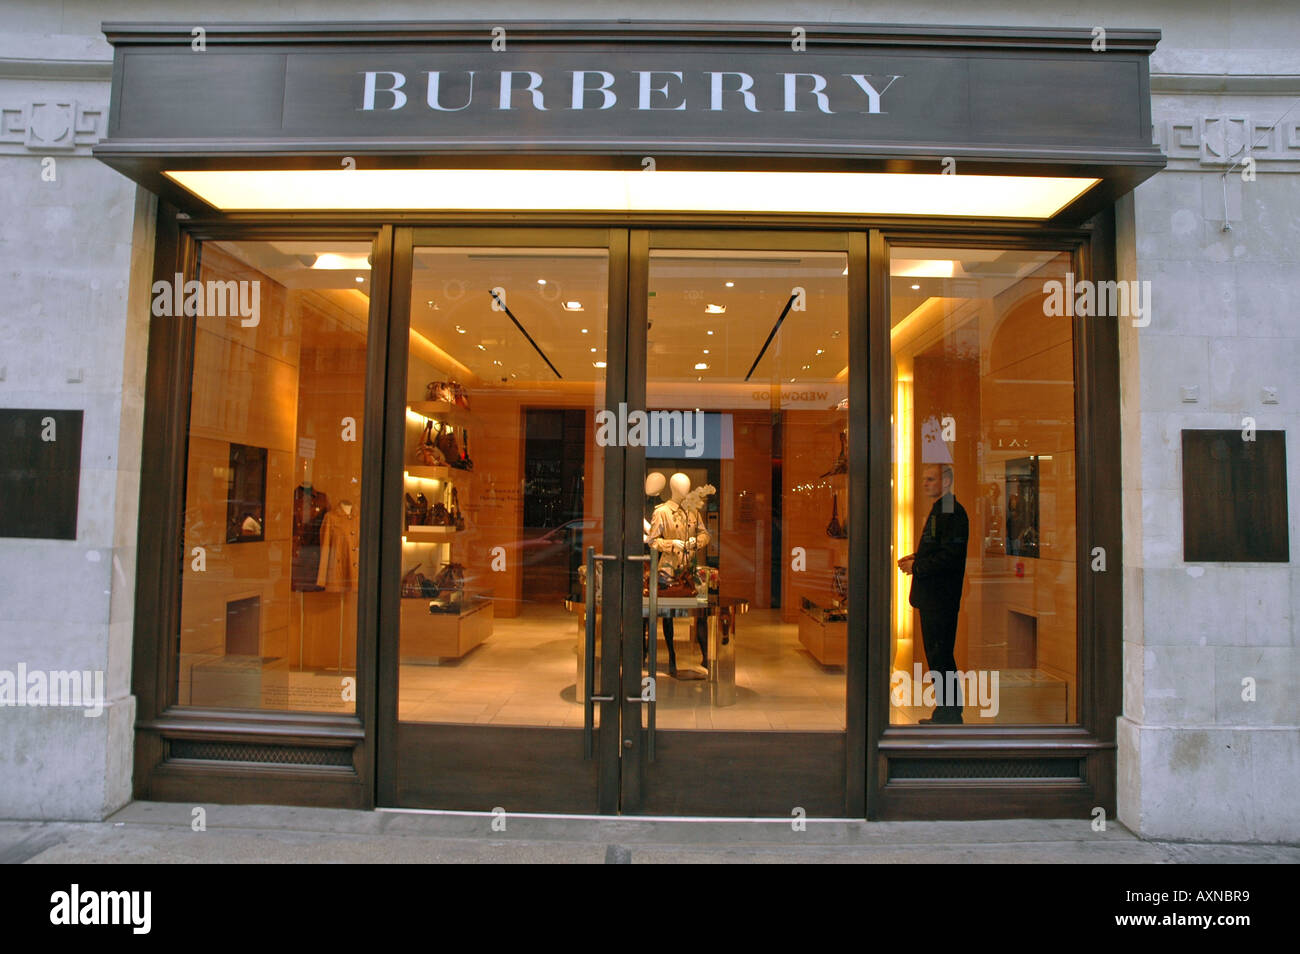 Burberry Outlet London Clearance, 57% OFF | www.smokymountains.org